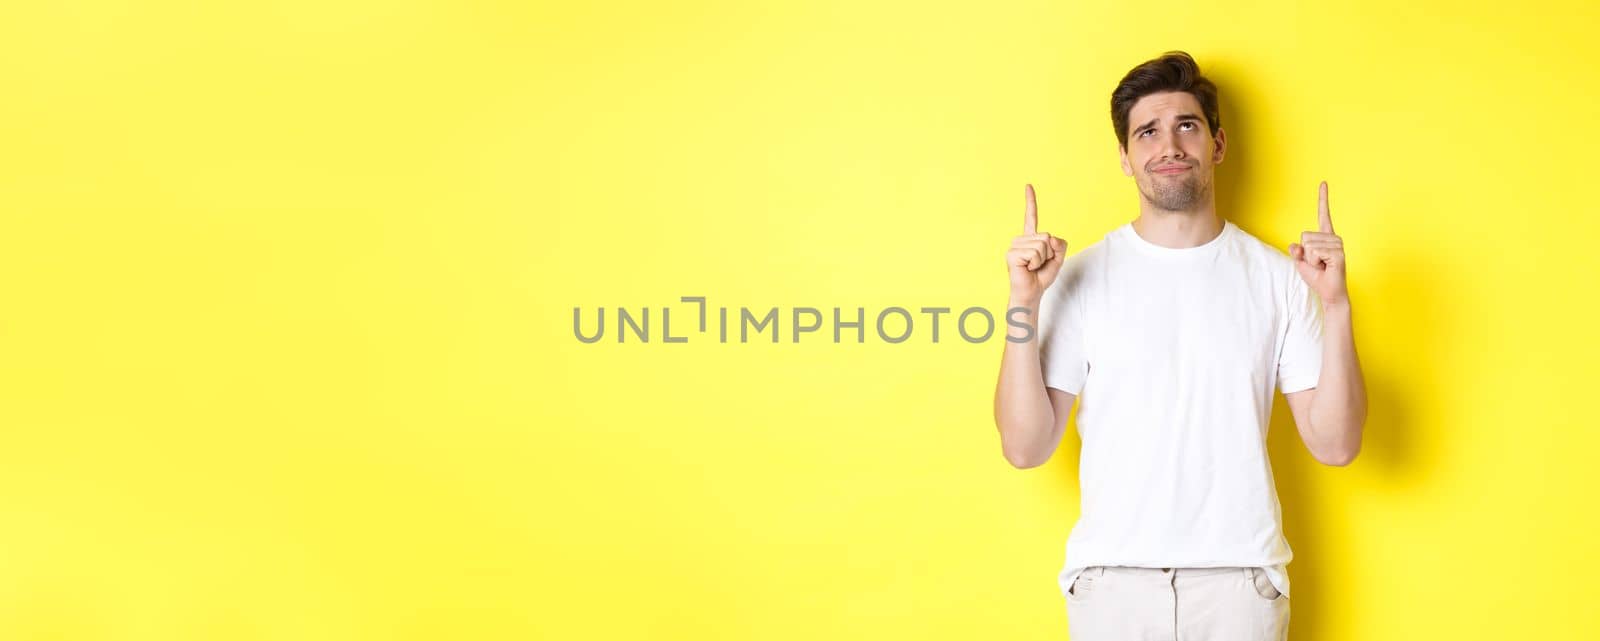 Skeptical young man pointing and looking up at something bad, judging offer, standing over yellow background.